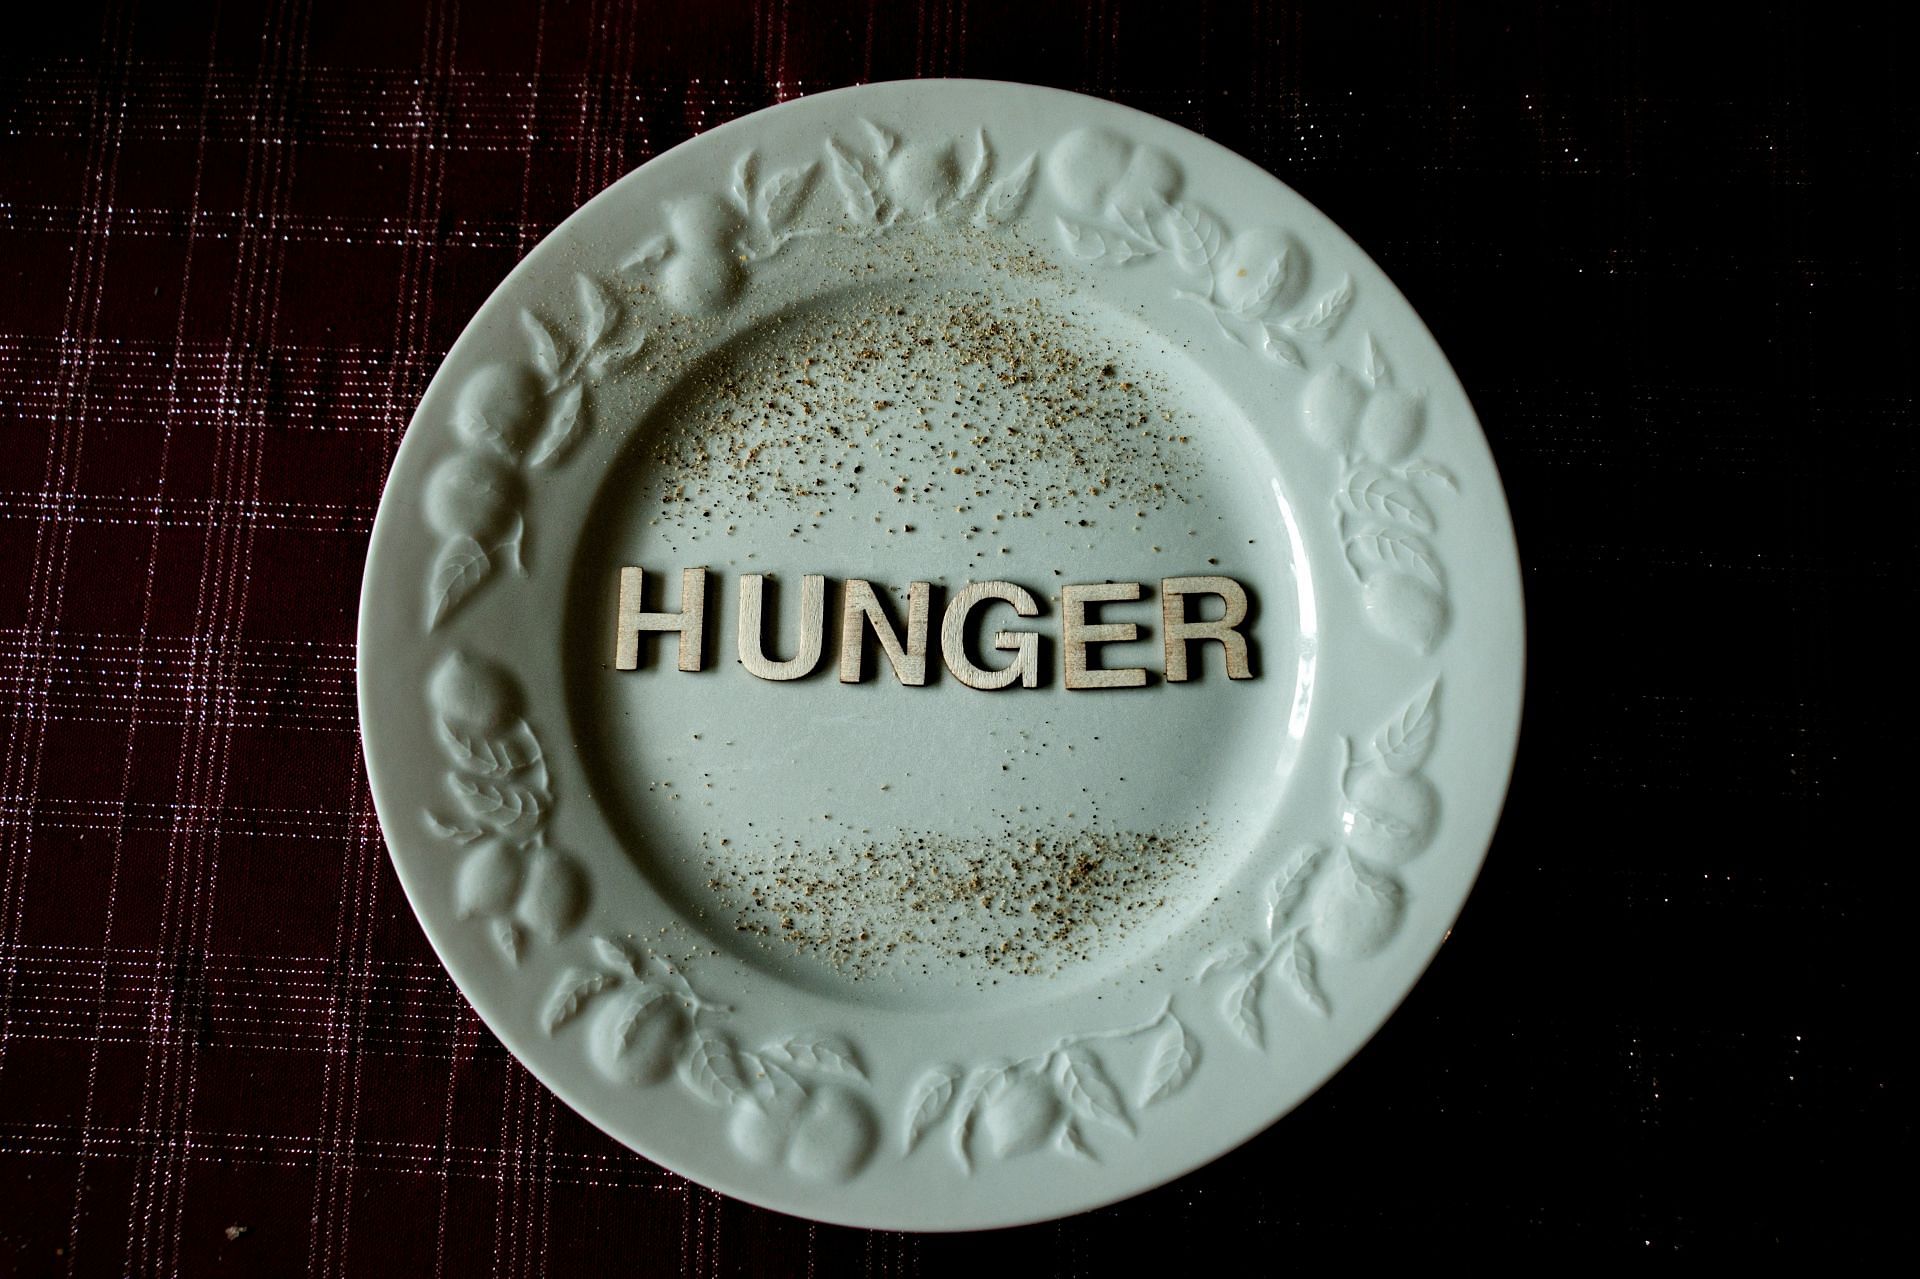 Controls your hunger (Image by Siegfried Poepperl/Unsplash)